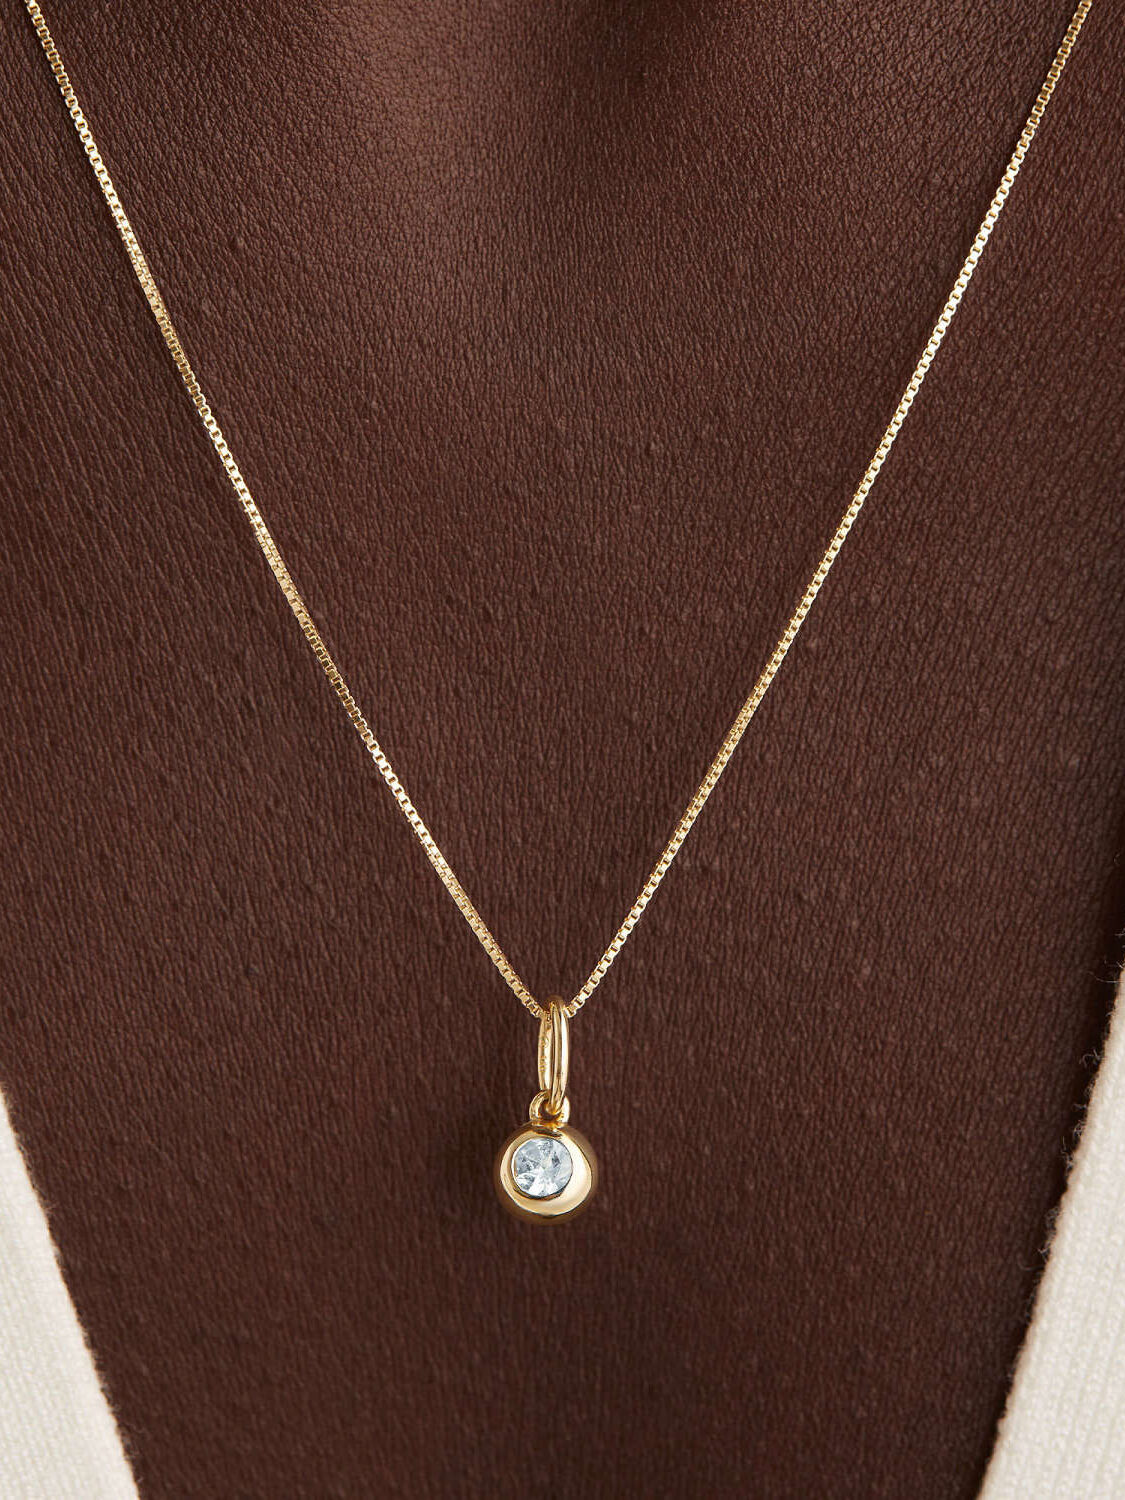 Gold necklace with a single pendant on a person wearing a white top.